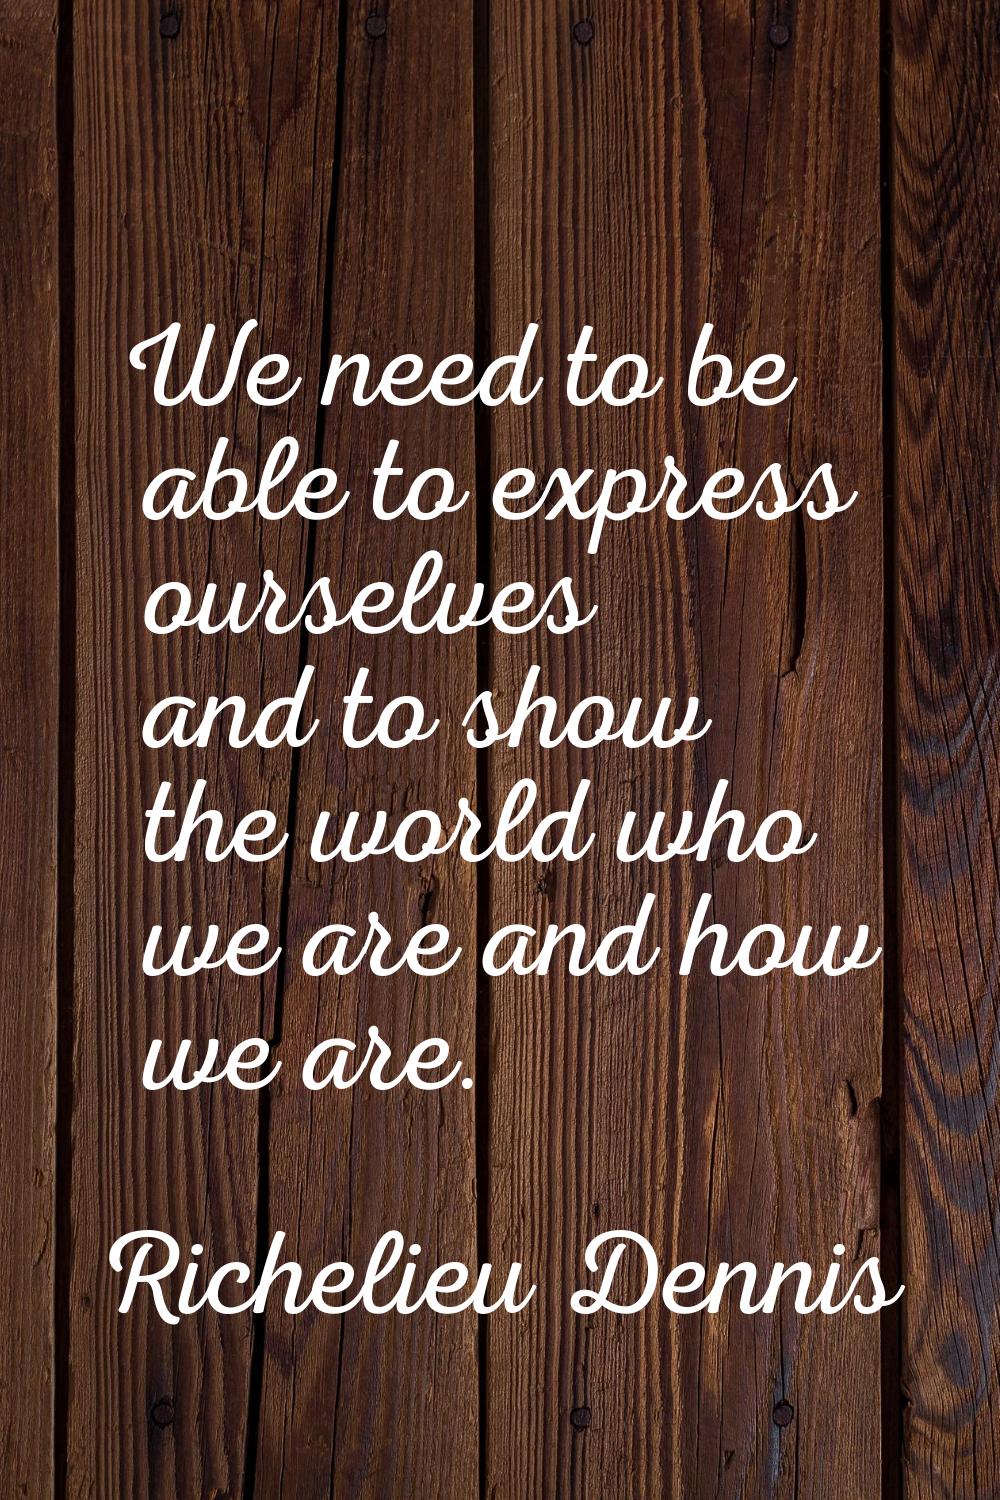 We need to be able to express ourselves and to show the world who we are and how we are.